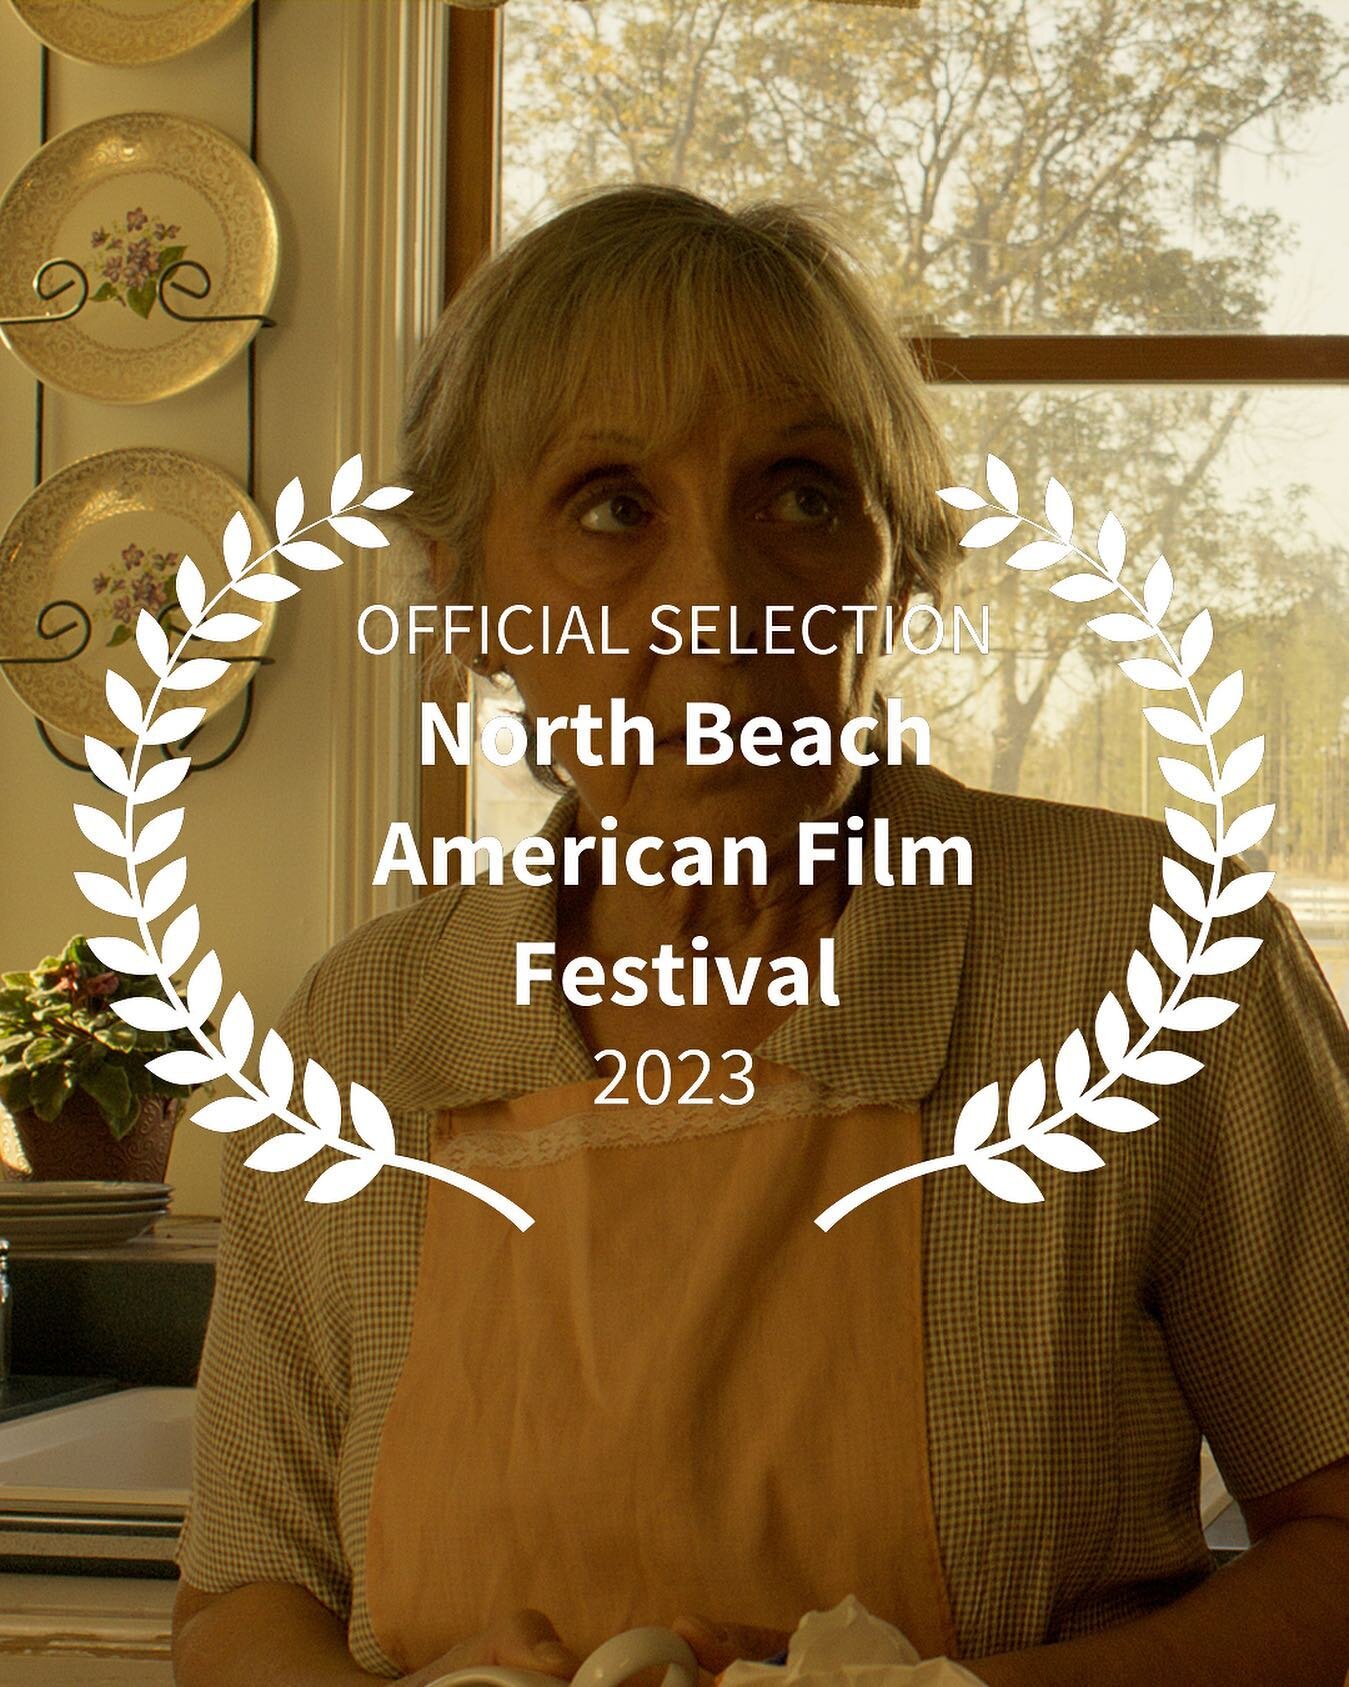 It&rsquo;s a big day for us! Daisies is an official selection of @filmvillage_sm8&rsquo;s North Beach American Film Festival and will be screening today! 

@sarahjeanlayton (writer/director) and @jordyngum (producer) will be onsite to catch all the a